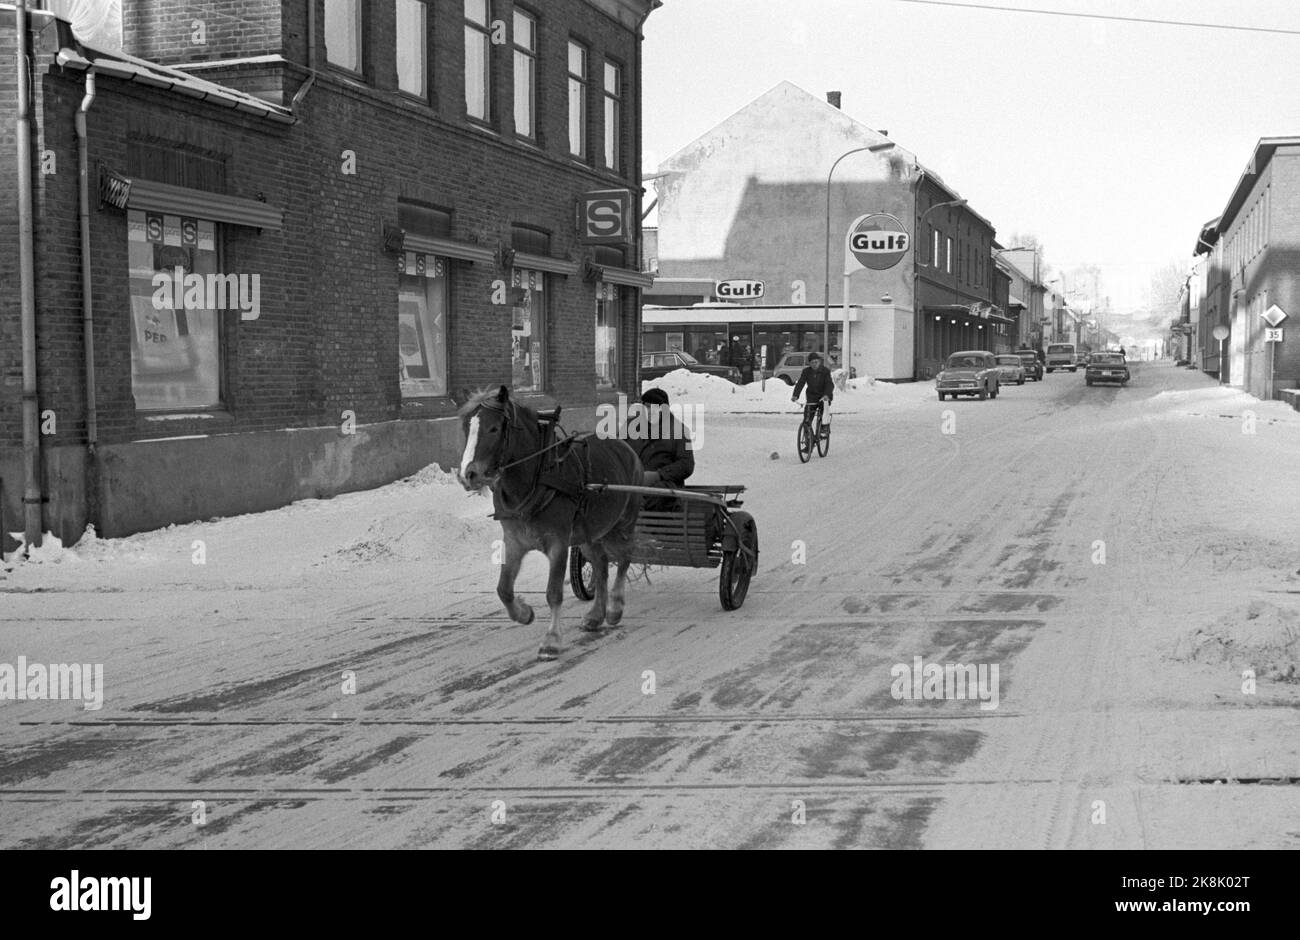 Vestfossen 19701212 The wheels are on Vestfossen. The layoffs at Vestfos Cellulose Factory came as a shock to the employees, as did the bankruptcy. Poor treatment of the employees. Environmental images from the last working days before the company closed its doors. Man with horse and cart through the street. Photo; Sverre A. Børretzen / Current / NTB Stock Photo